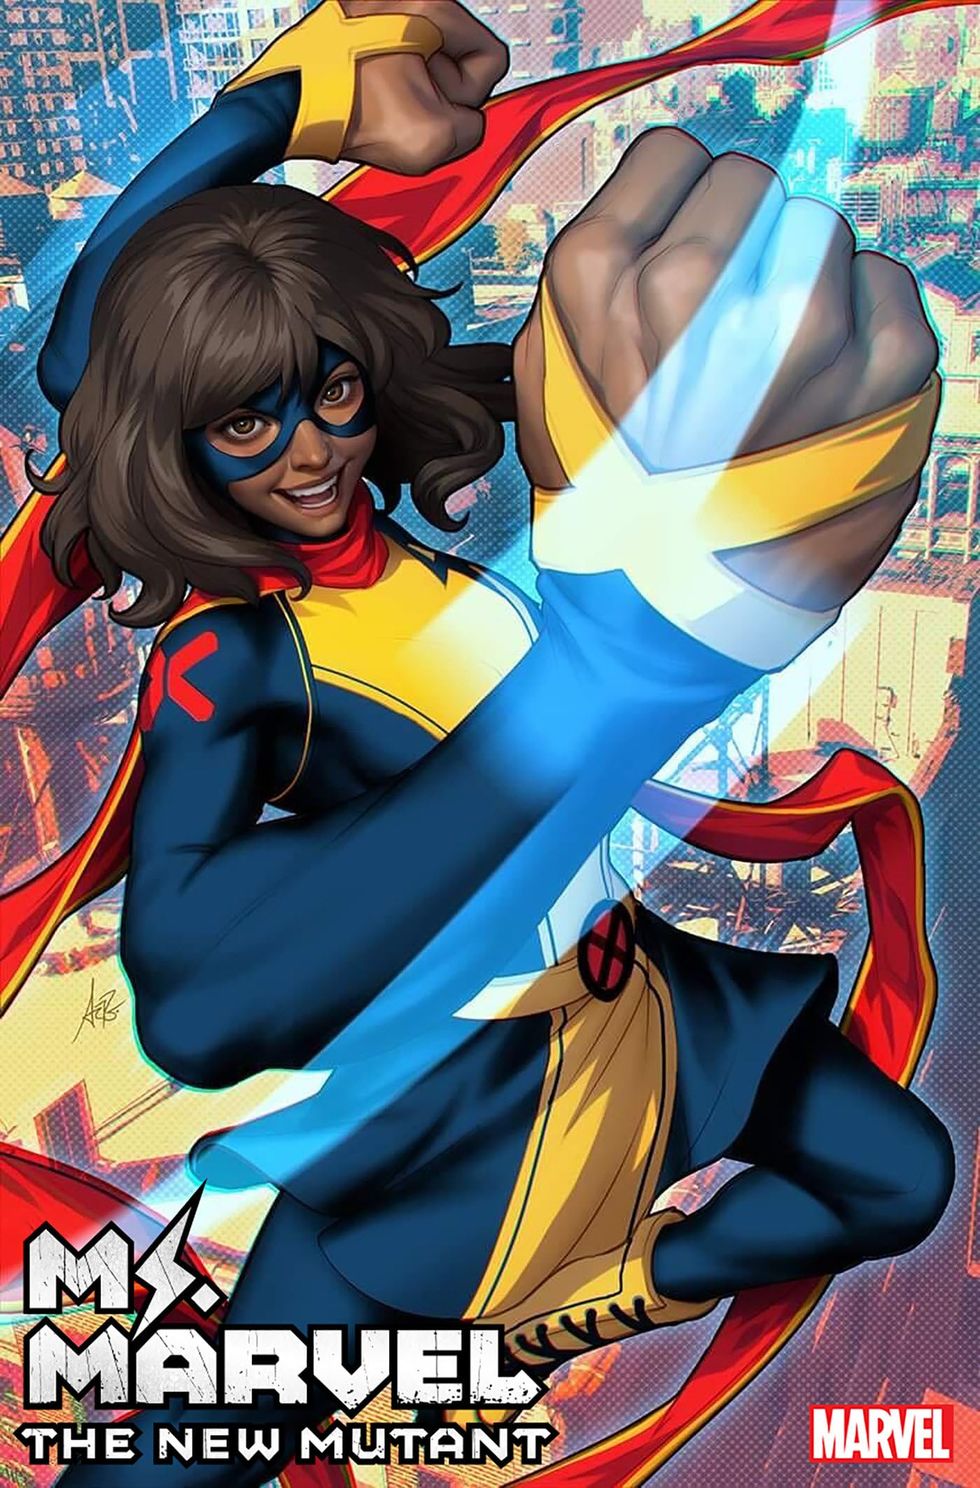 'Ms. Marvel: The New Mutant' by Iman Vellani and Sabir Pirzada 